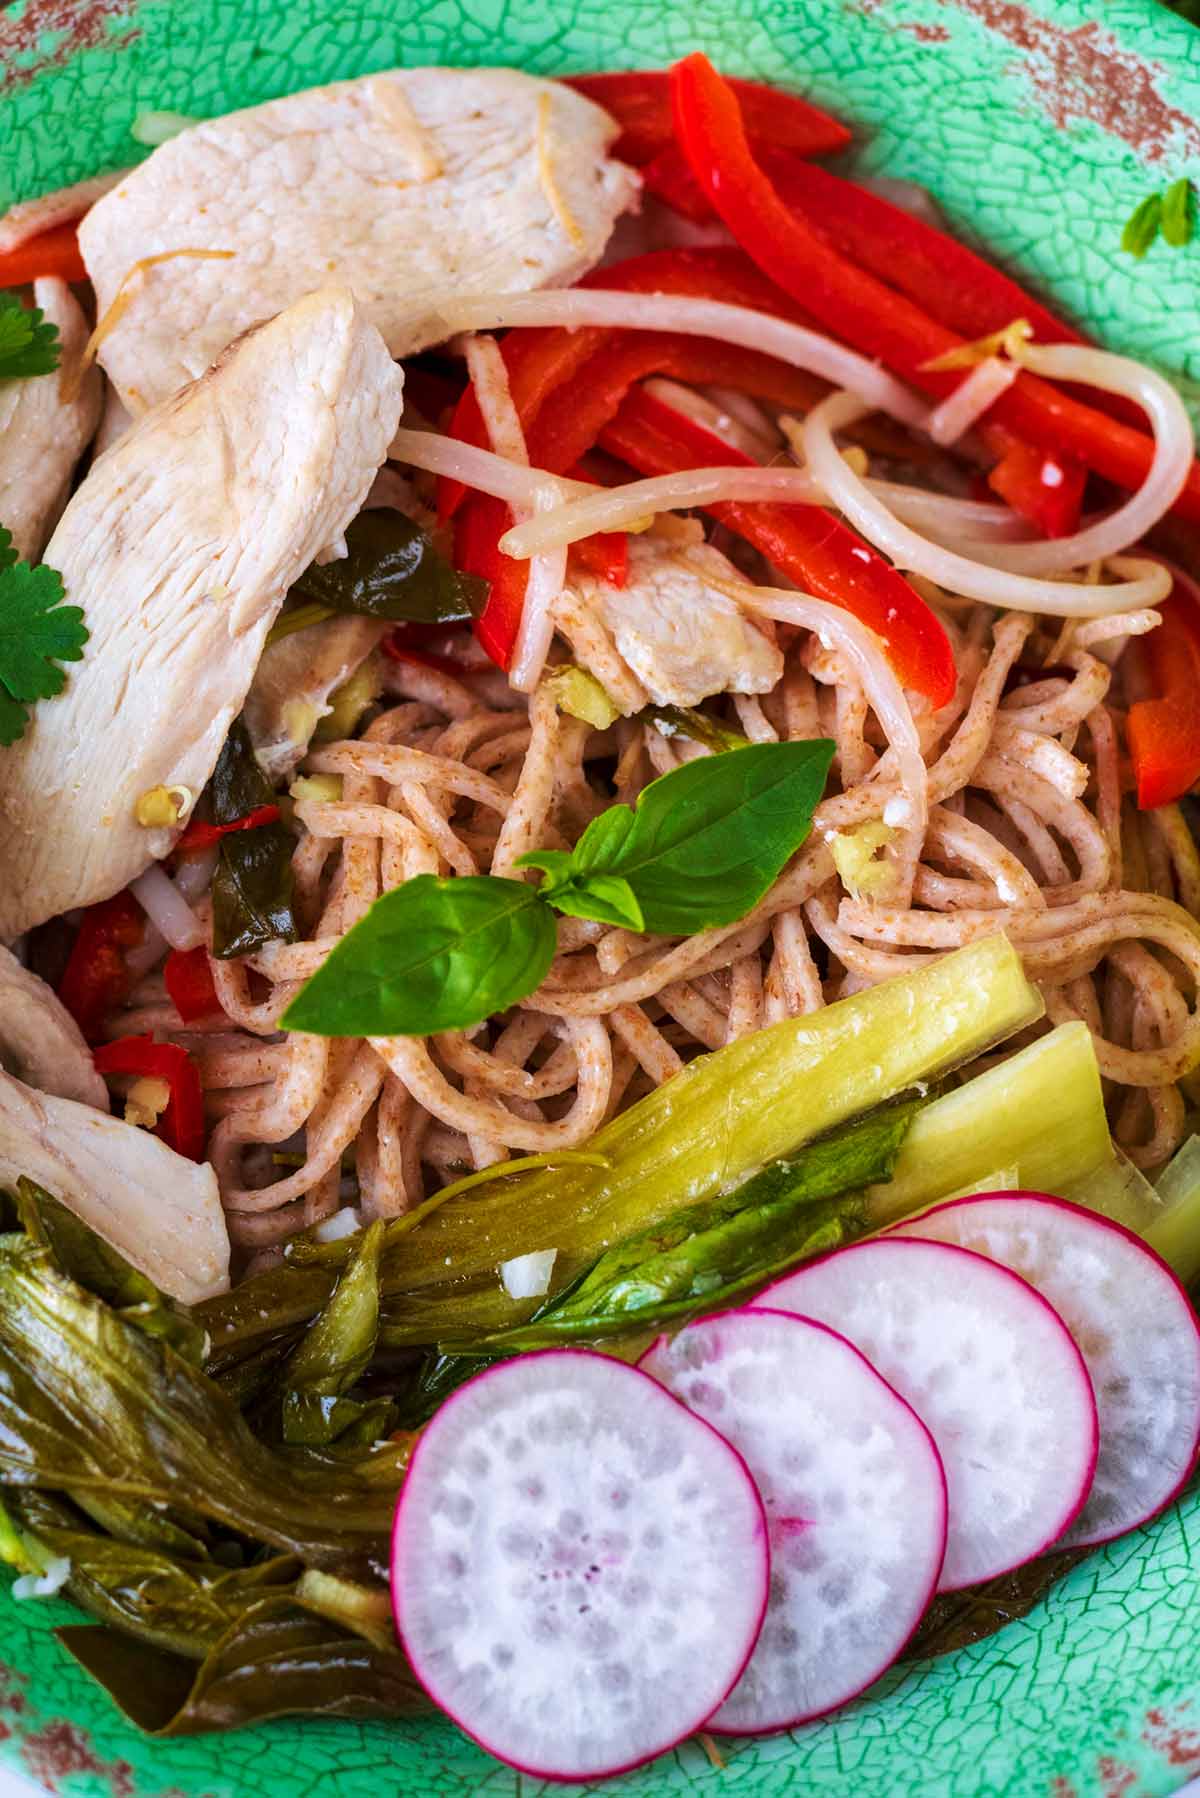 A bowl of noodles, chicken and vegetables in a broth.